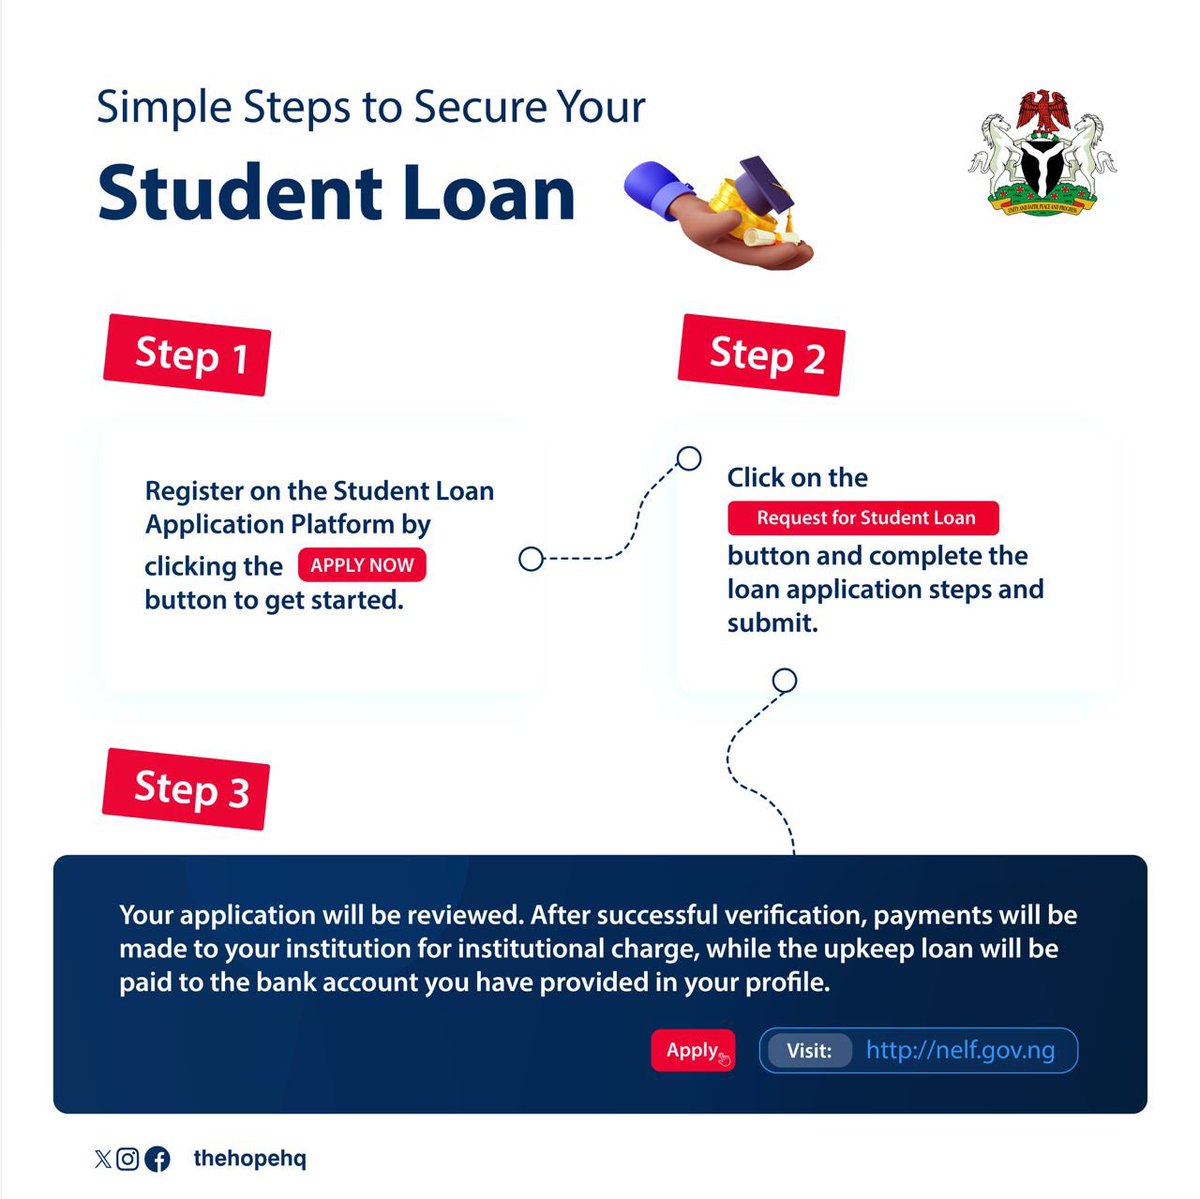 One thing that stood out for me in the many benefits of student loan is that students can focus on their studies without worrying about immediate financial constraints. It can be accessed via nelf.gov.ng. 

#GreatnessIsComing.